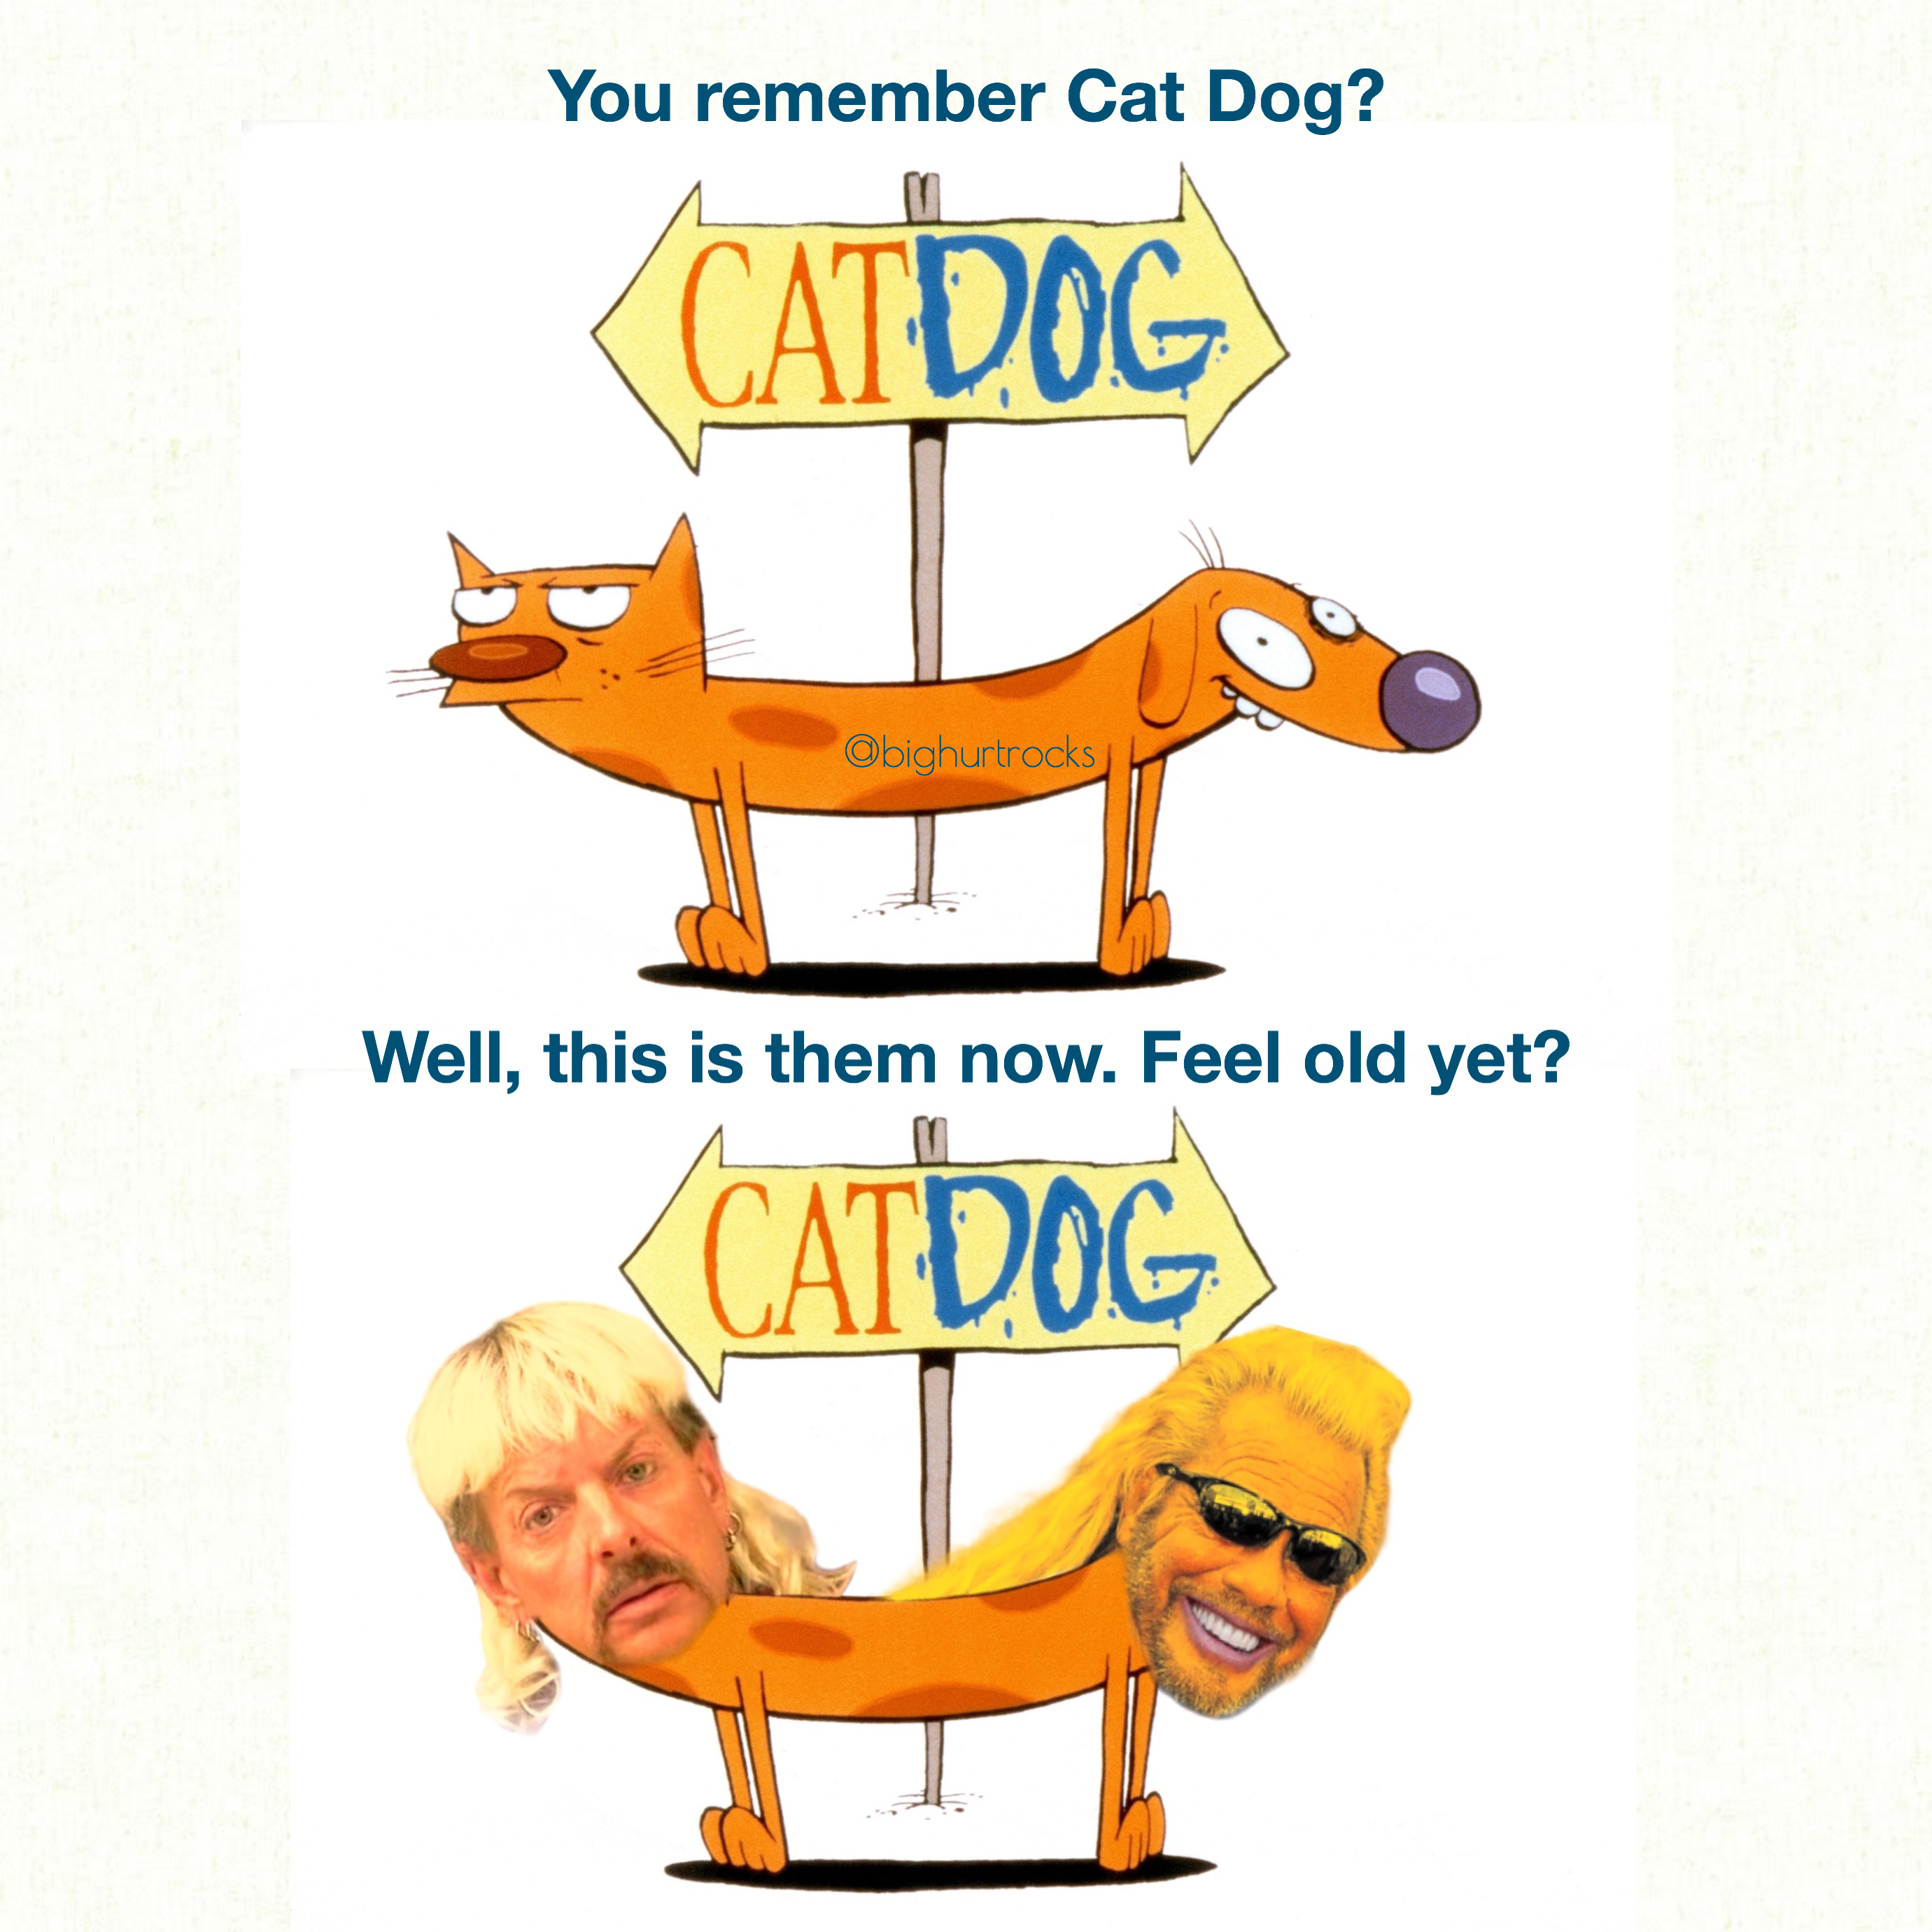 cat dog - You remember Cat Dog? Catdog bihurtrocks Well, this is them now. Feel old yet? Catdog